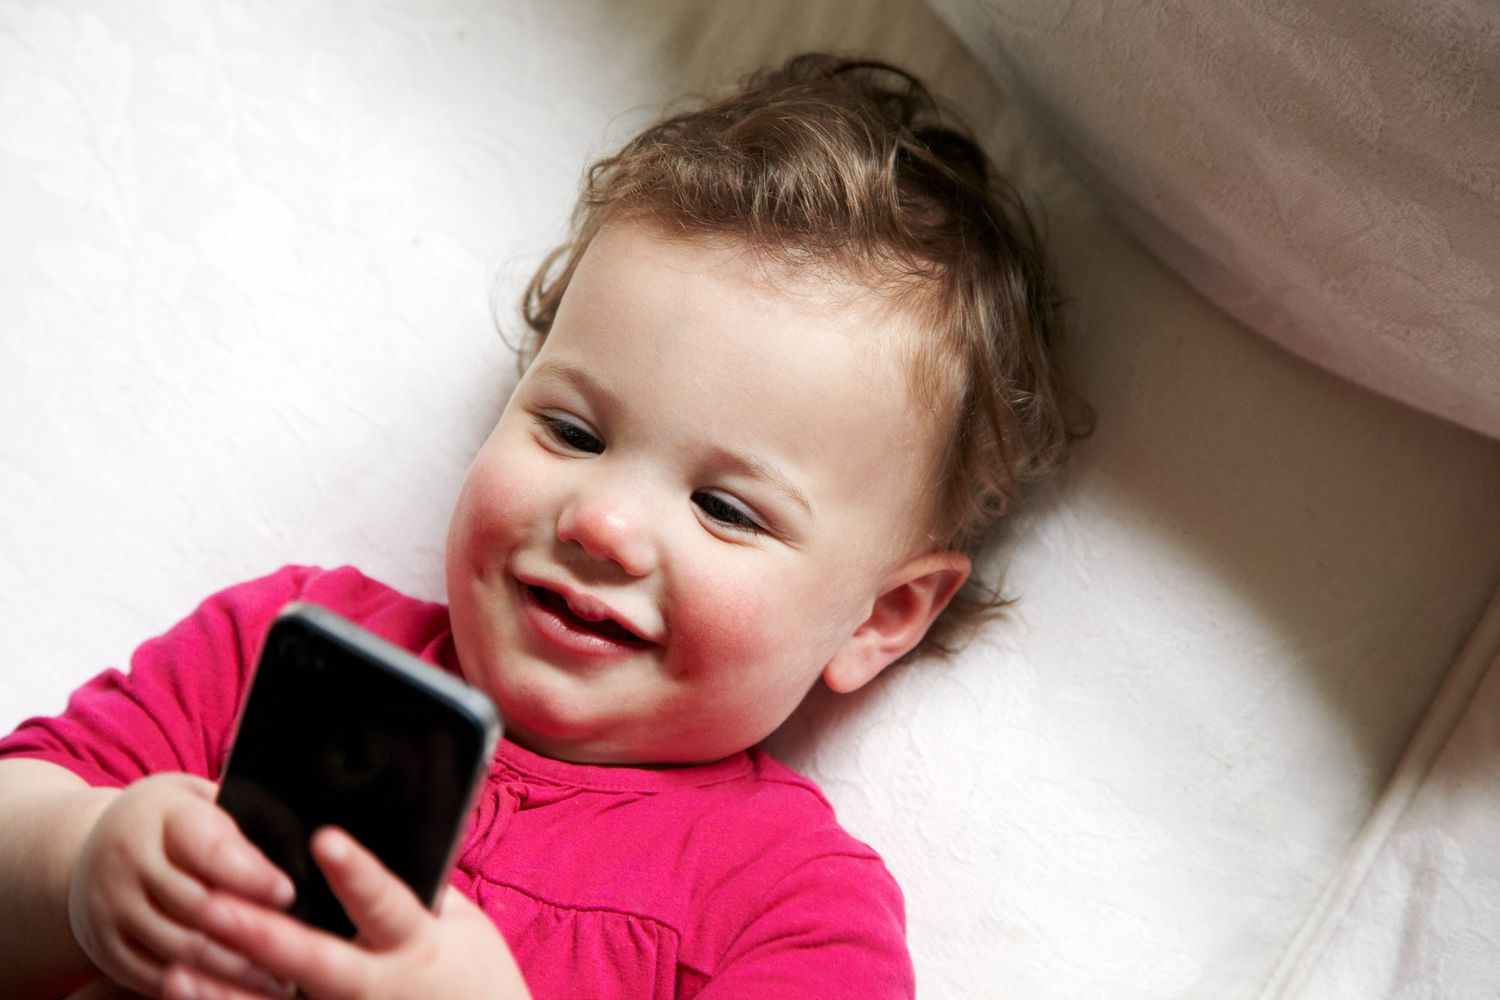 An image of a baby playing on a cellphone.